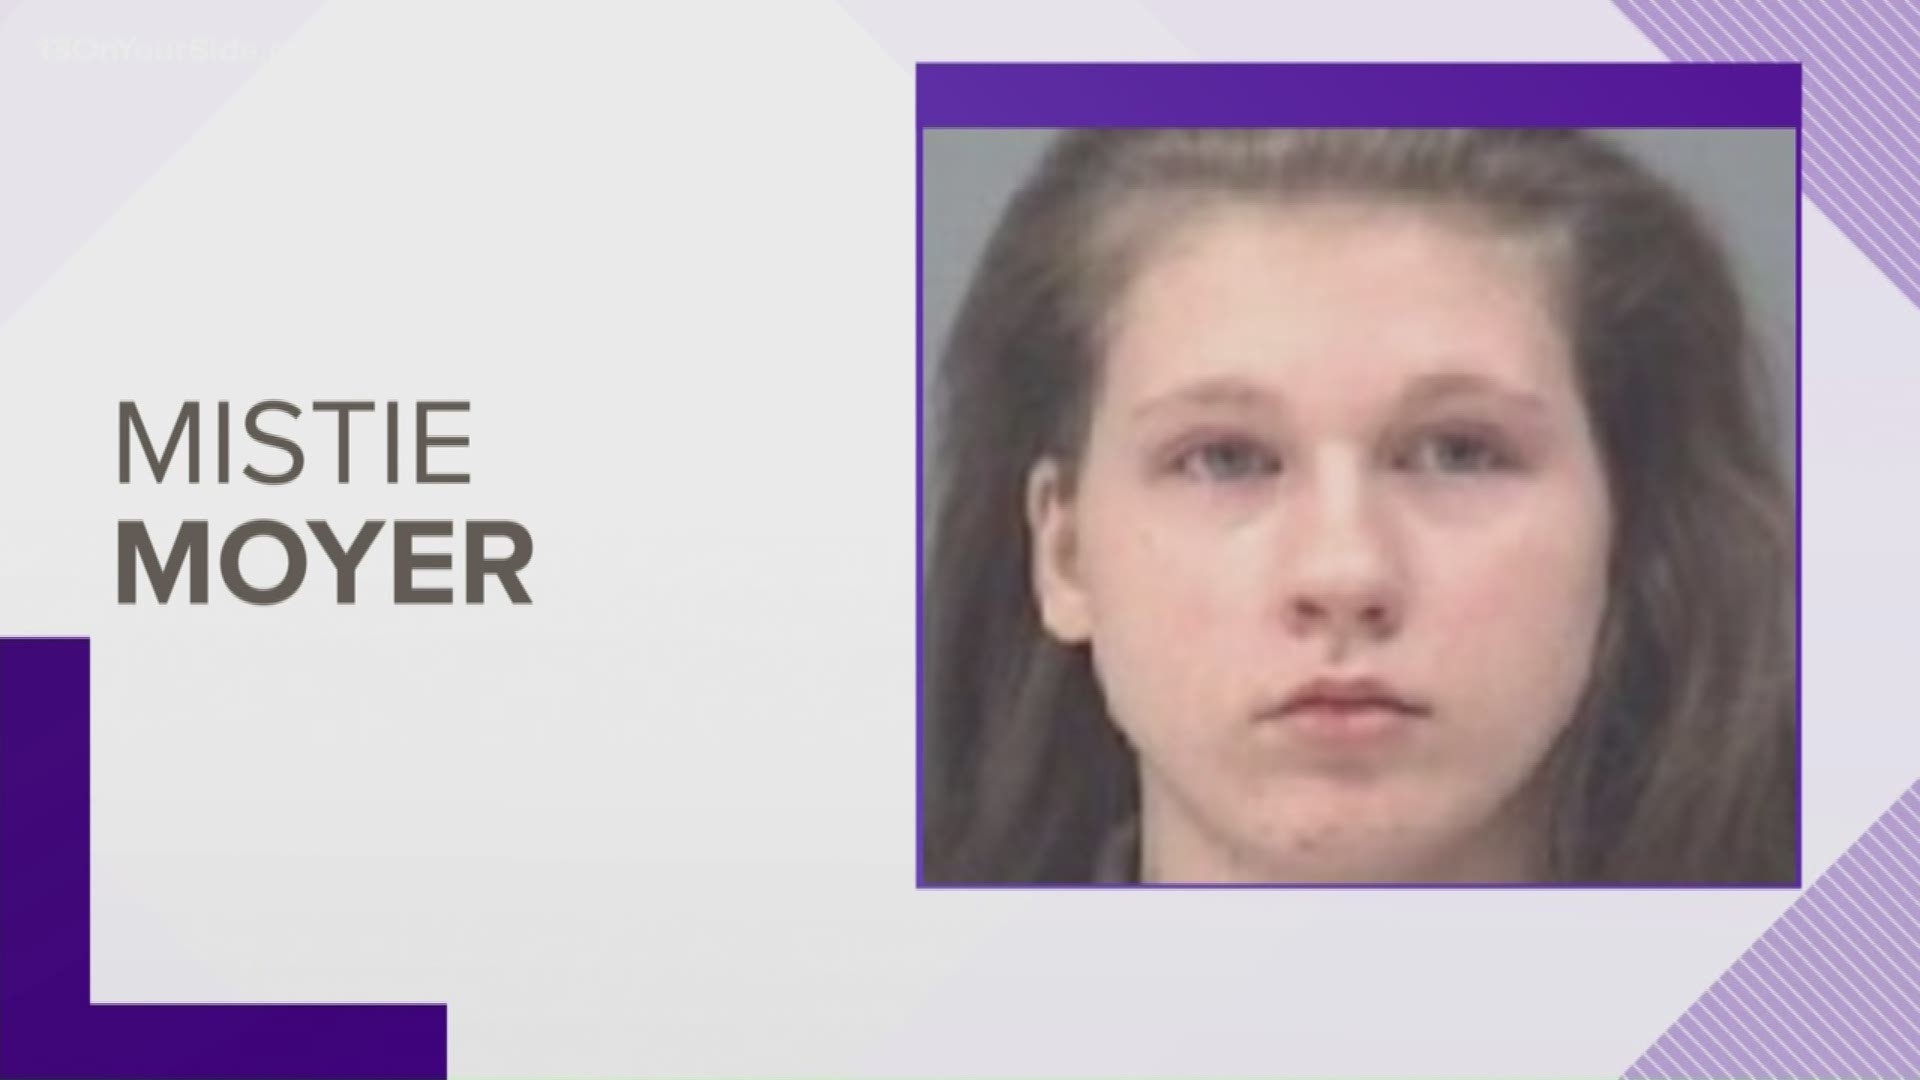 Mistie Moyer will spend up to 40 years in prison for the death of her 3-month-old son.